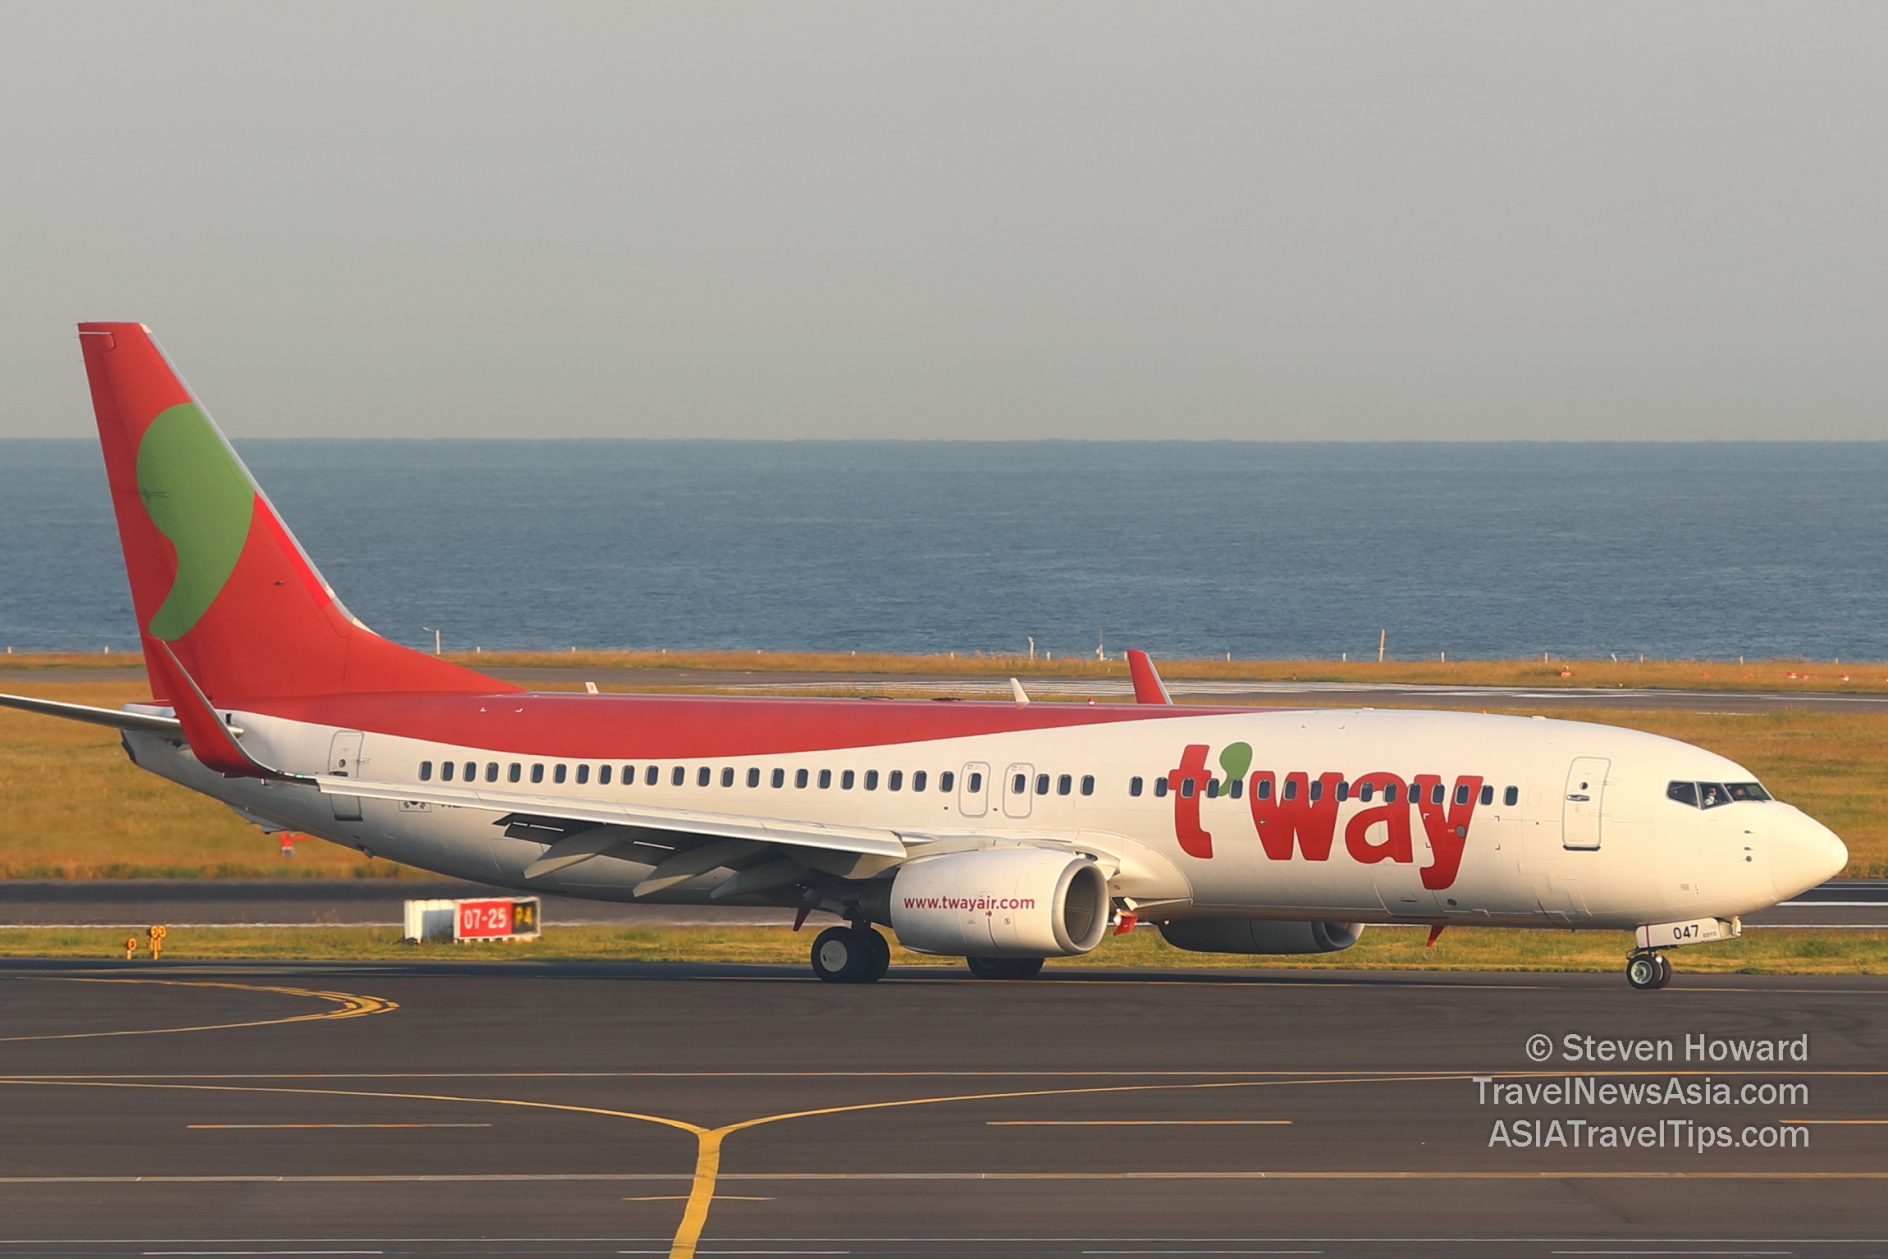 T’Way Boeing 737. Picture by Steven Howard of TravelNewsAsia.com Click to enlarge.